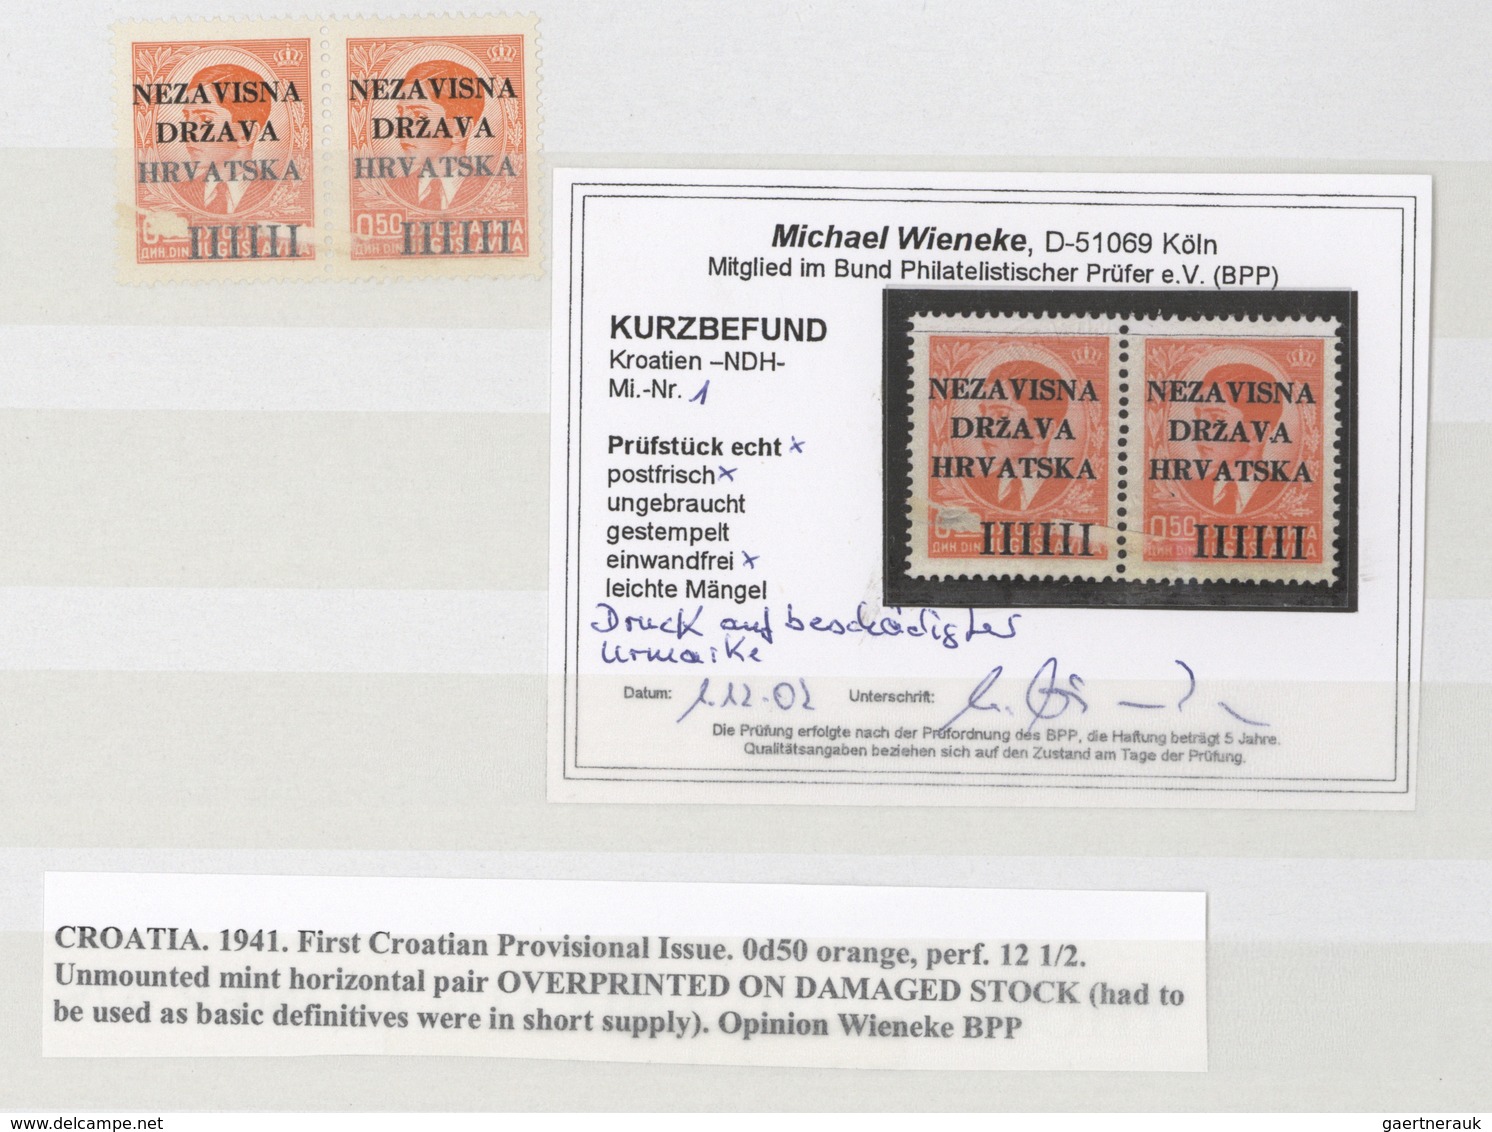 29772 Kroatien: 1941, 12 Apr, 1st overprint issue, specialised mint assortment of apprx. 100 stamps showin